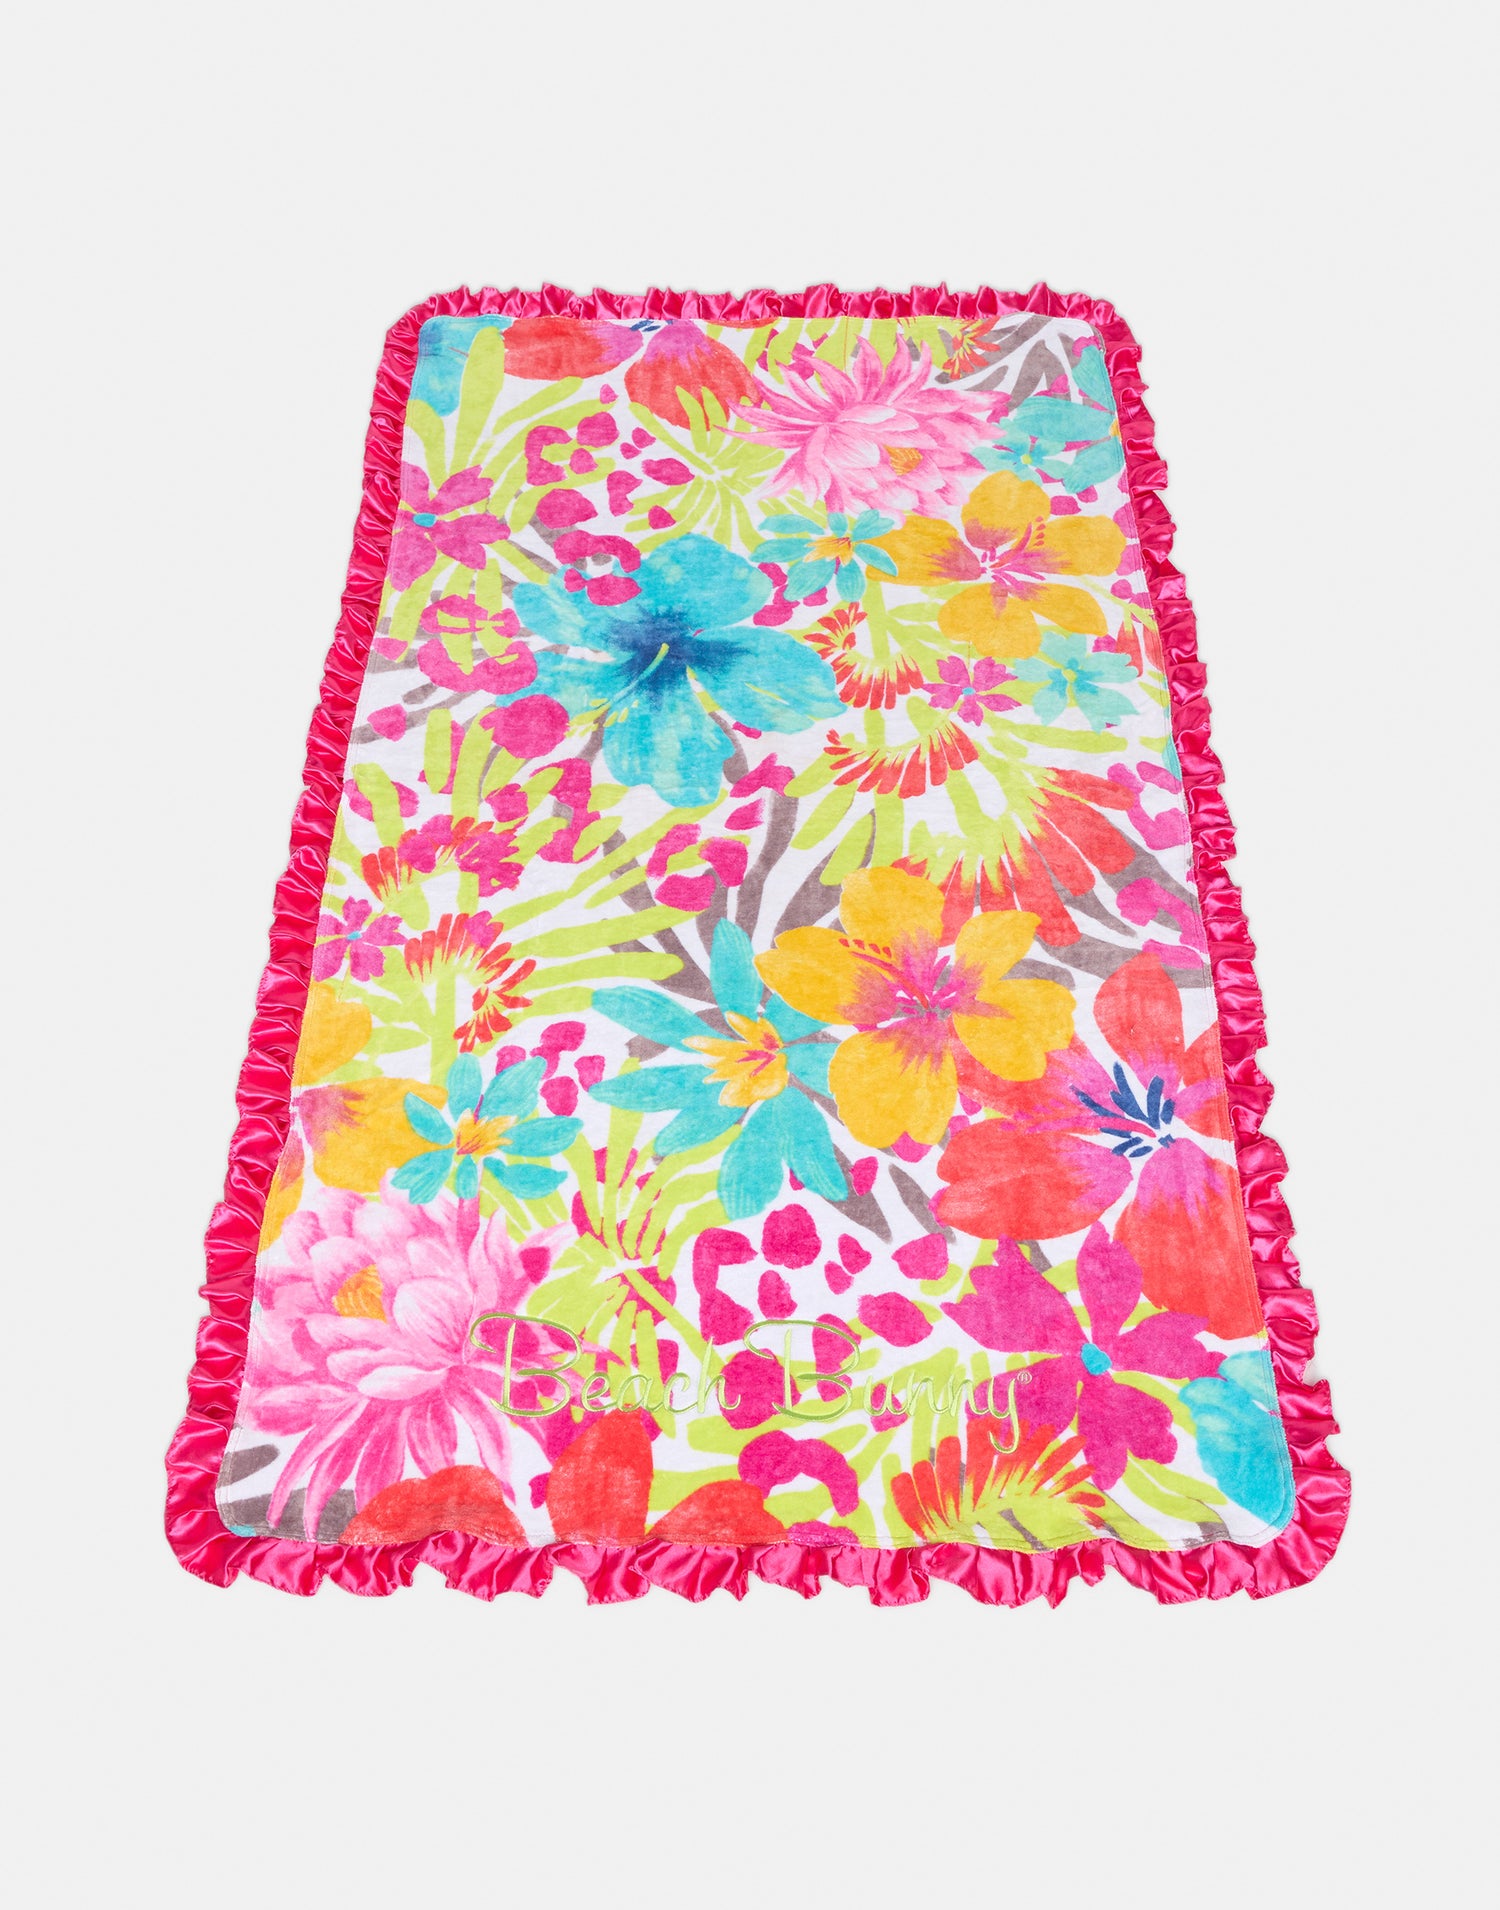 Beach Bunny Towel in Jungle Floral with Dark Pink Ruffle - Product View